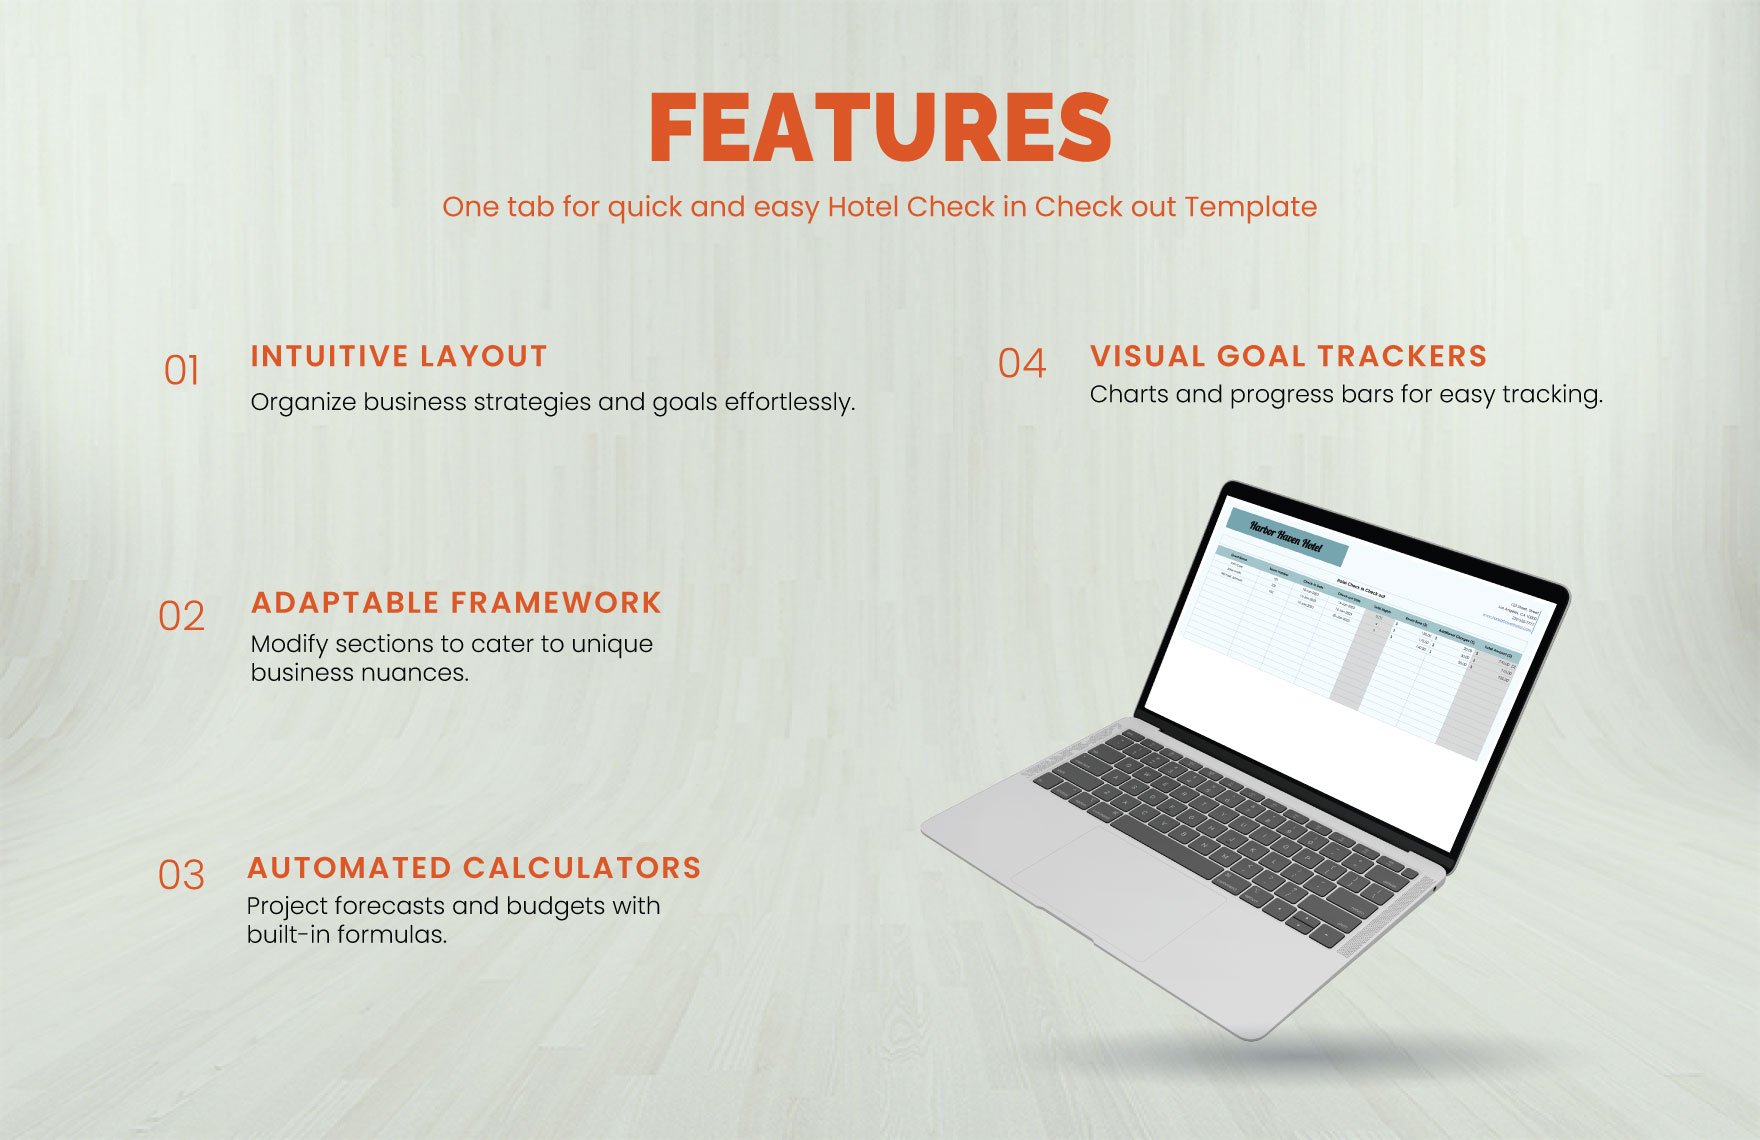 Hotel Check in Check out Template